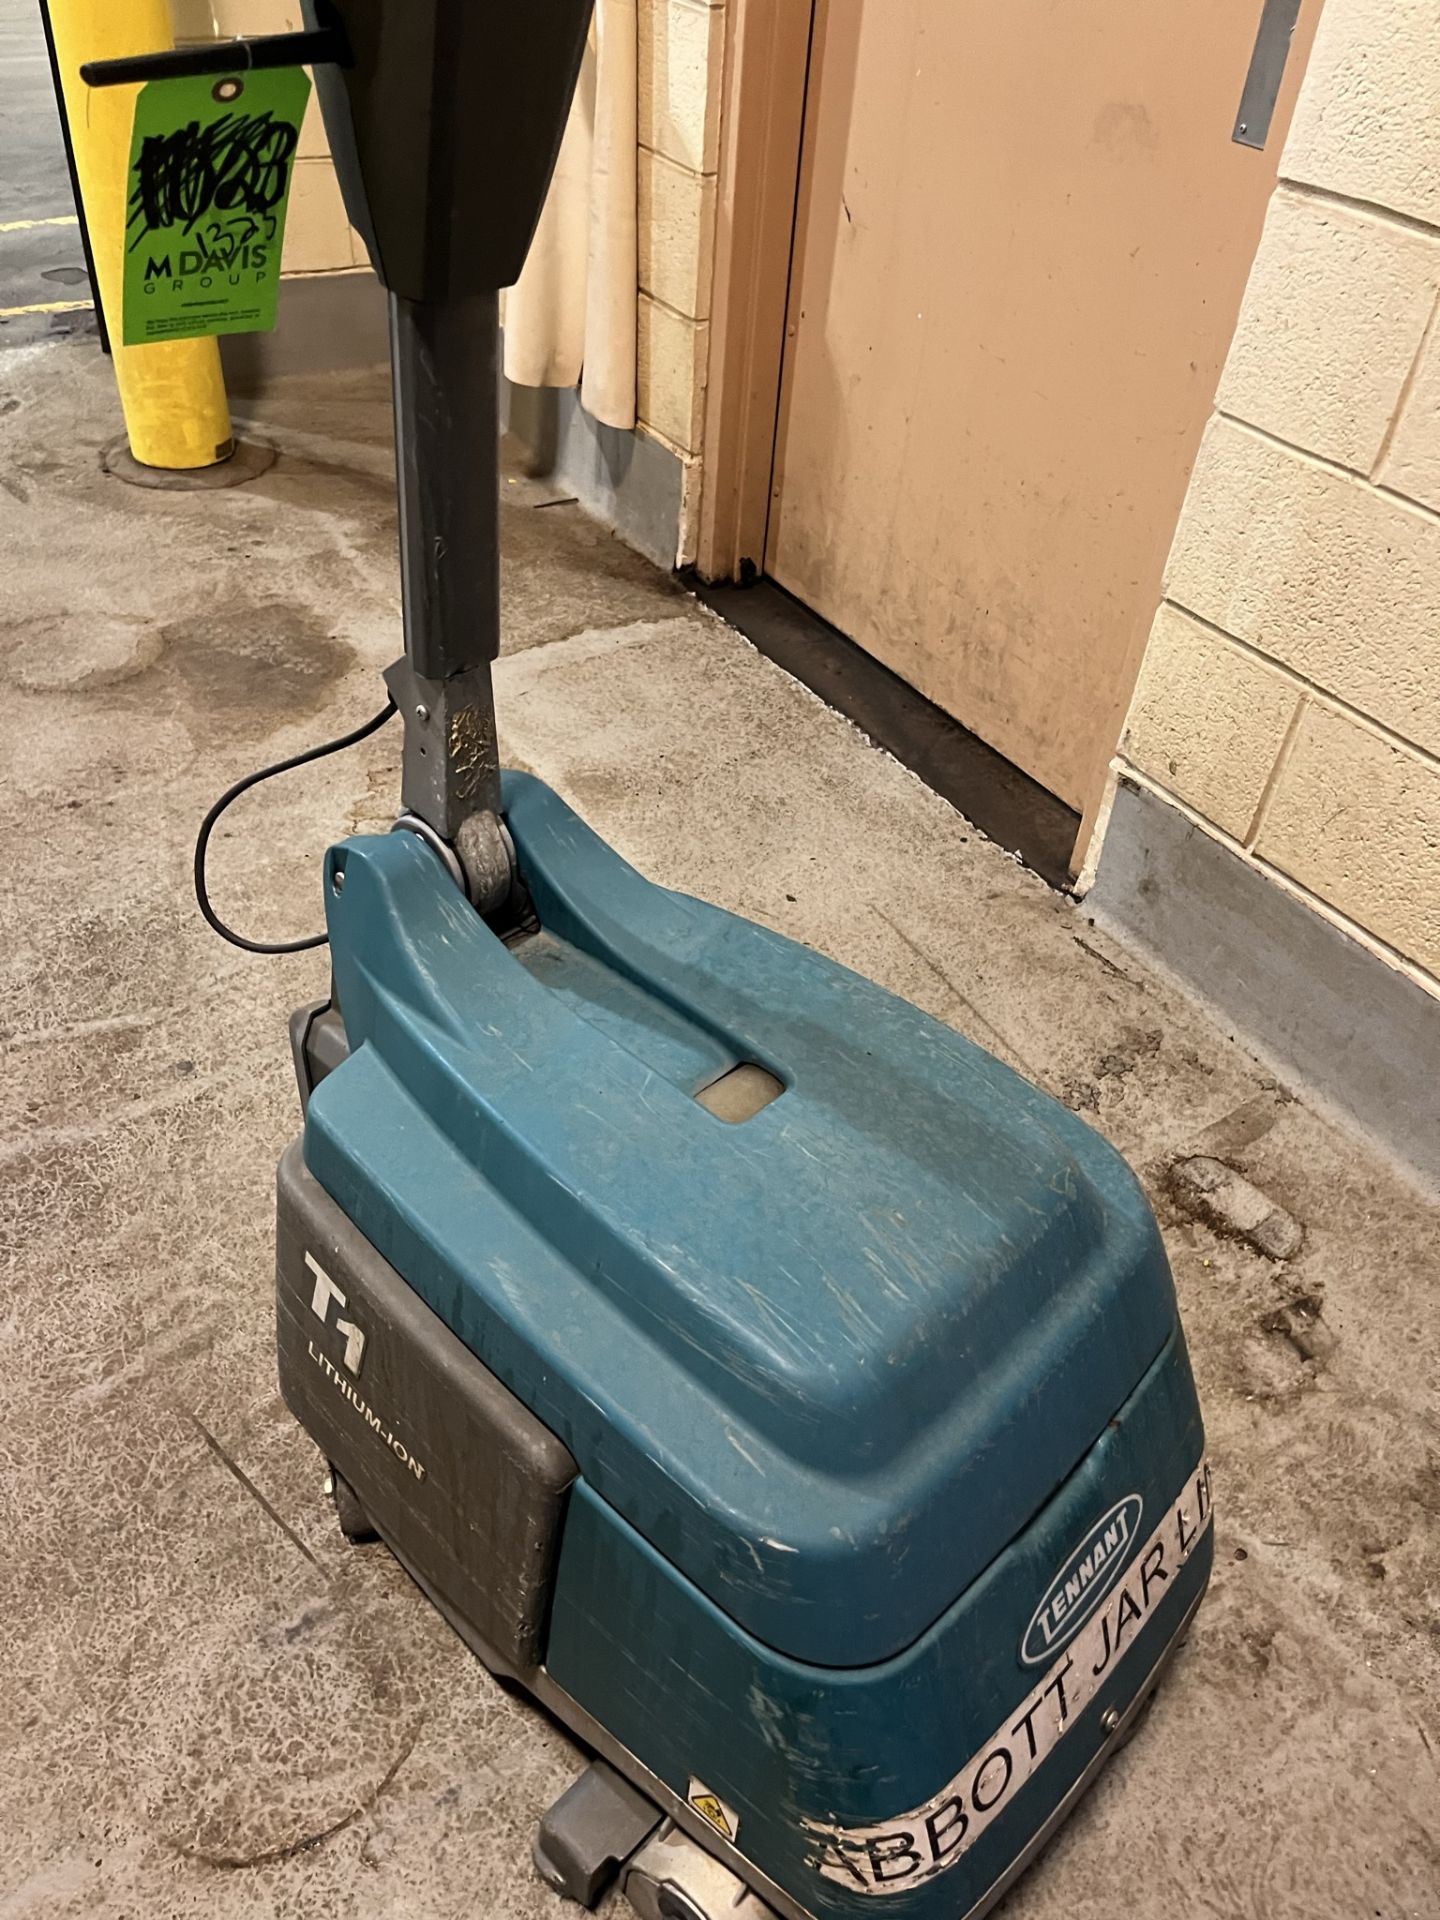 TENNANT T1 CORDED WALK BEHIND FLOOR SCRUBBER (Located Freehold, NJ) (Simple Loading Fee $137.50) - Image 4 of 6